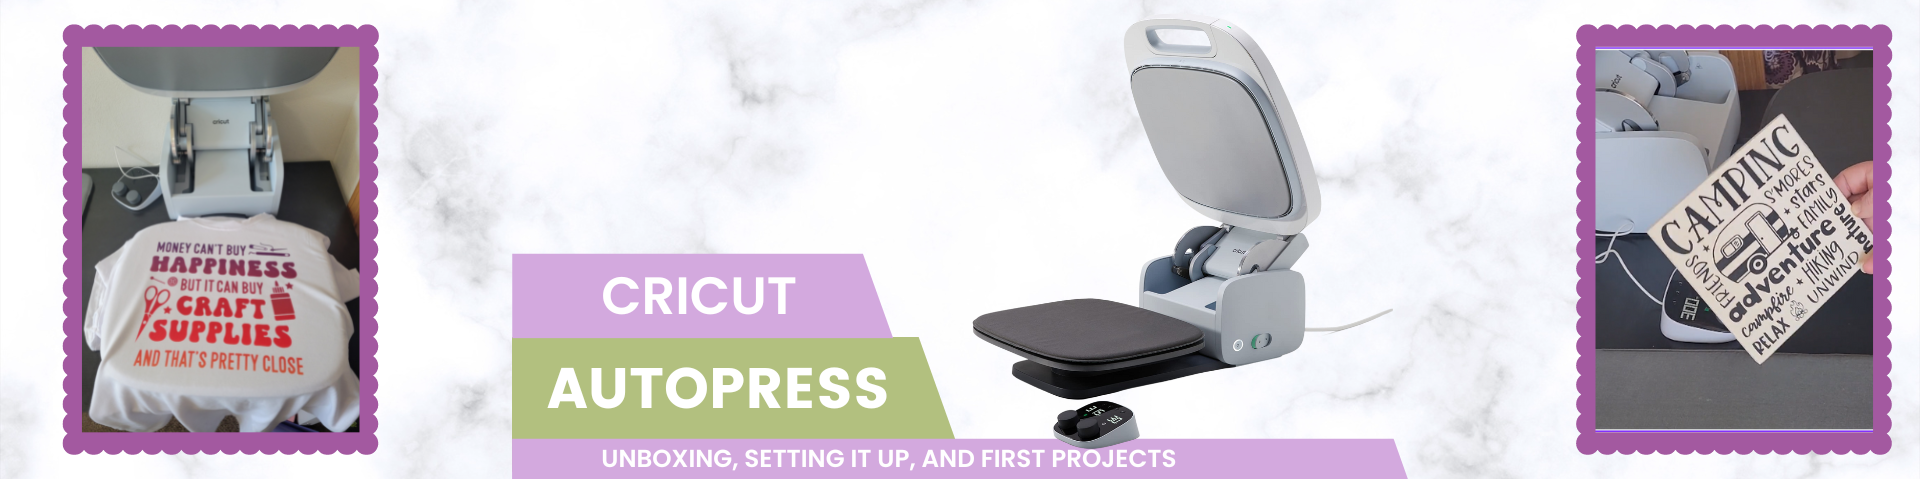 Cricut Autopress // Unboxing, Set Up, and First Projects